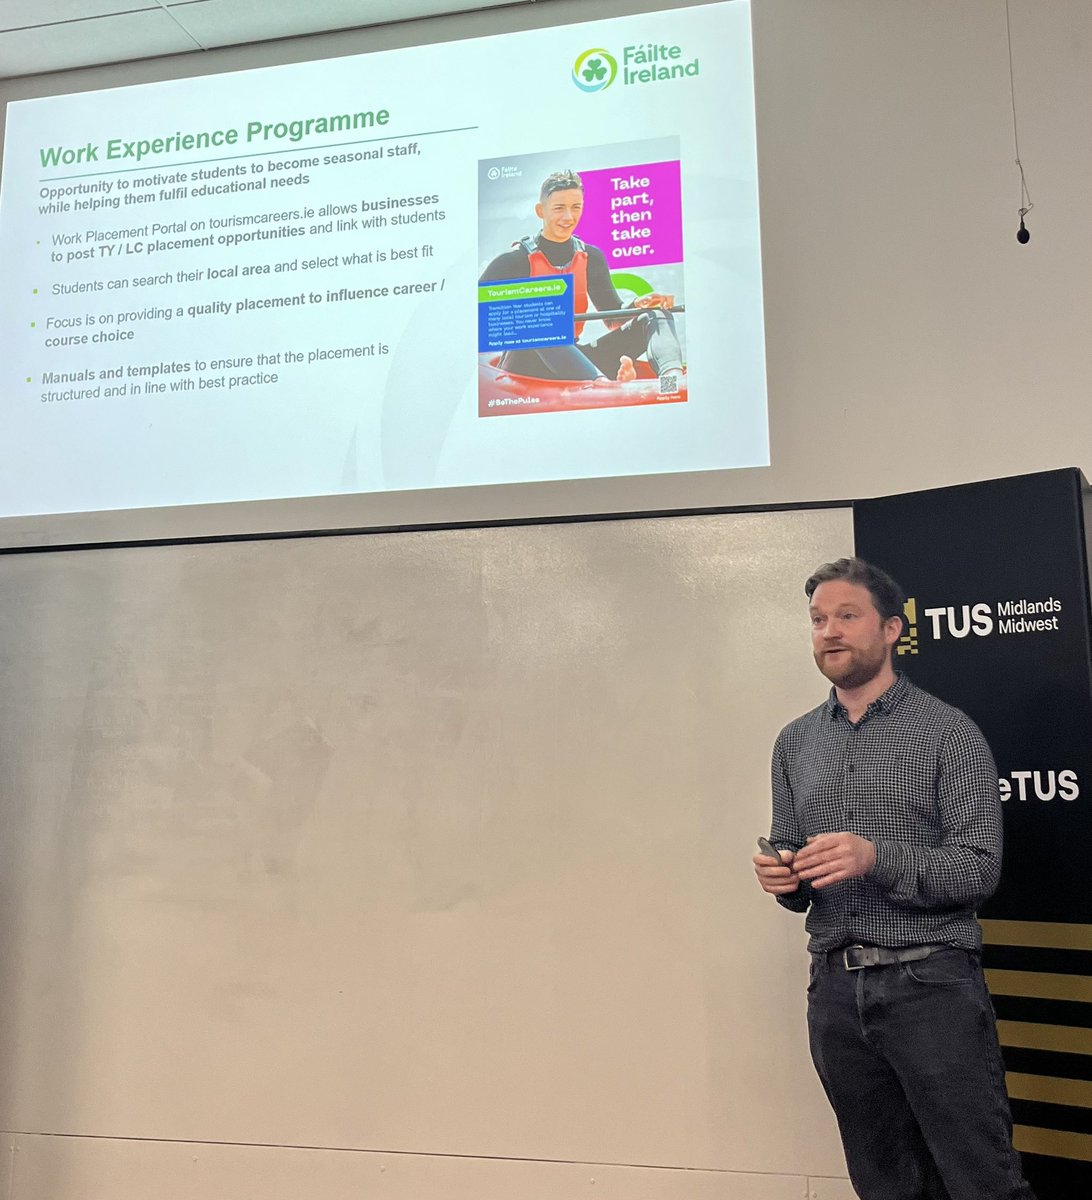 Eight in ten third-level work placements result in a job offer - reinforcing the importance of college-industry collaboration #tourismcareers #WeAreTUS Michael Quinn from @Failte_Ireland Careers presents to students @foodtourismlit